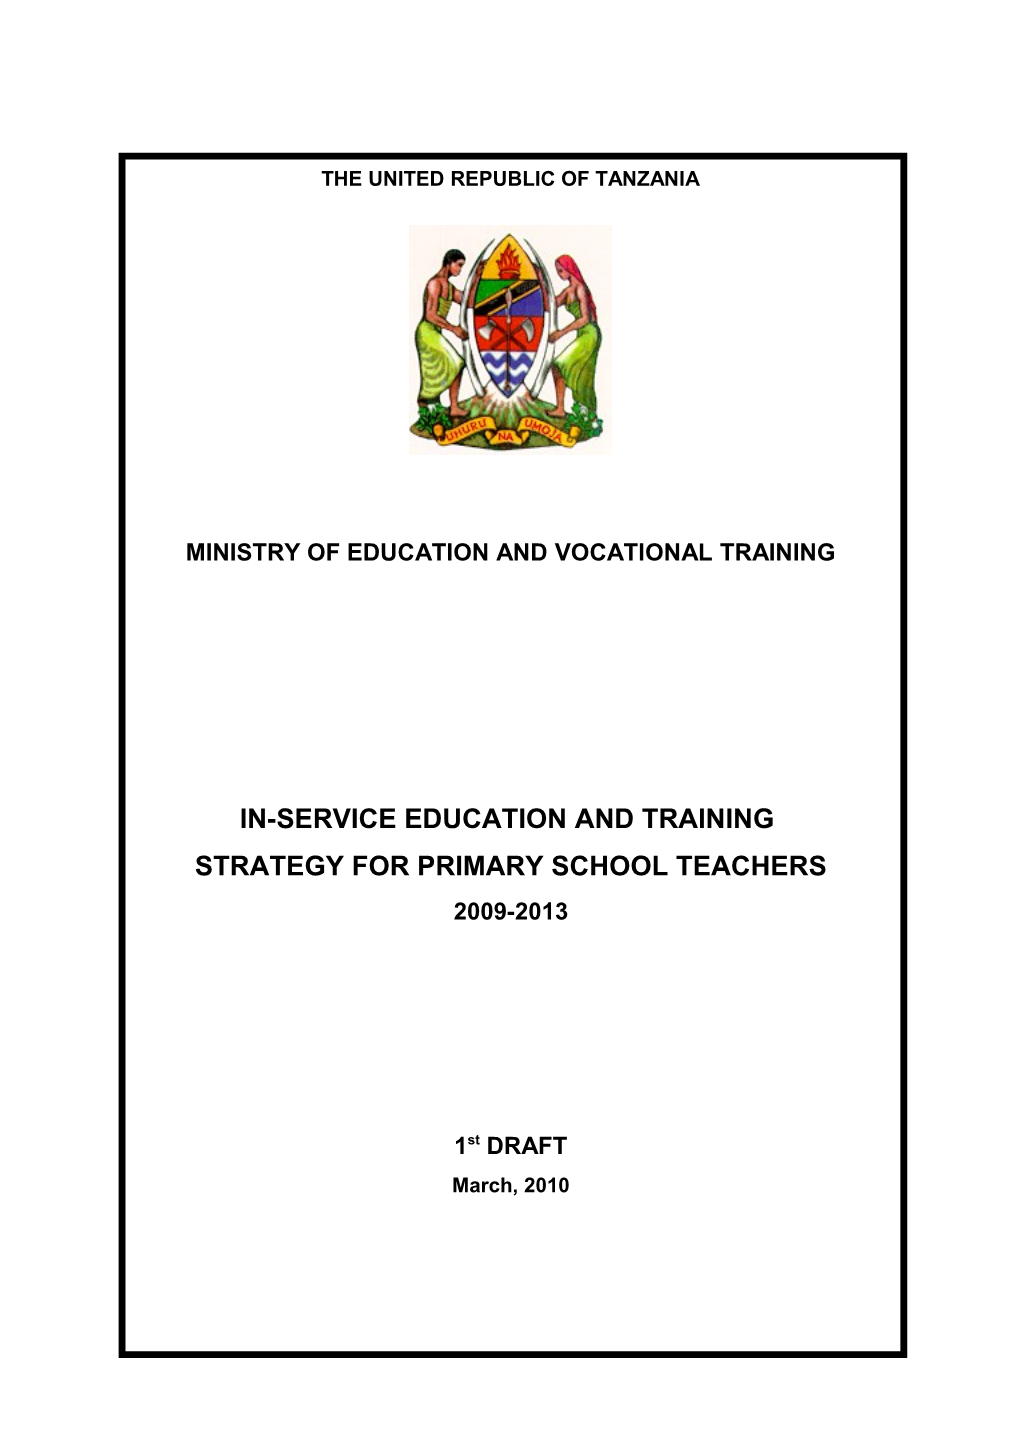 Action Plan and Budget for Primary School Teachers Inset Strategy 2009 - 2013